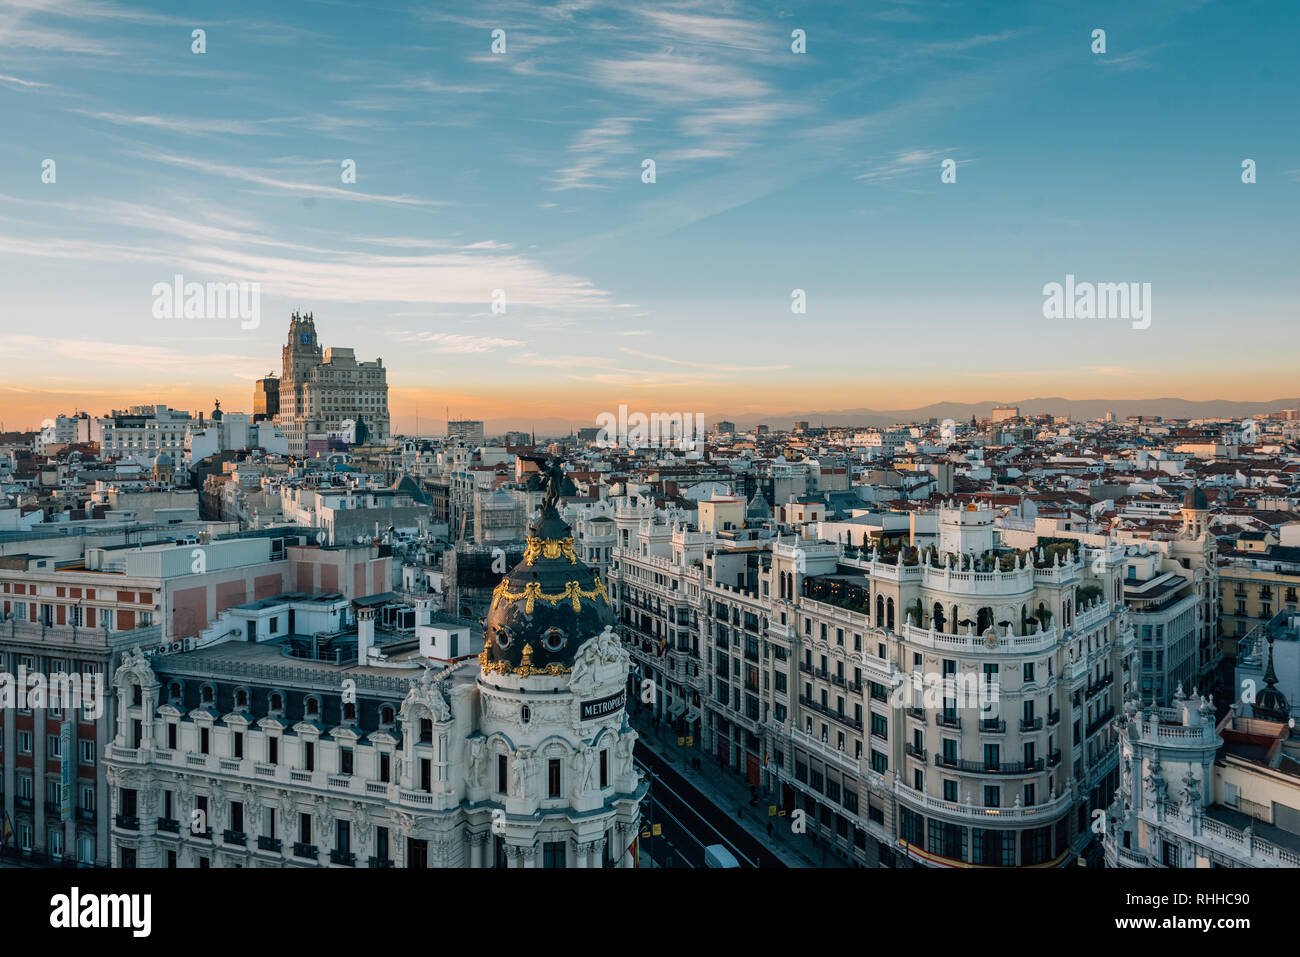 View of the Metropolis Building and Gran Via from the Circulo de Bellas Artes rooftop at sunset, in Madrid, Spain Stock Photo